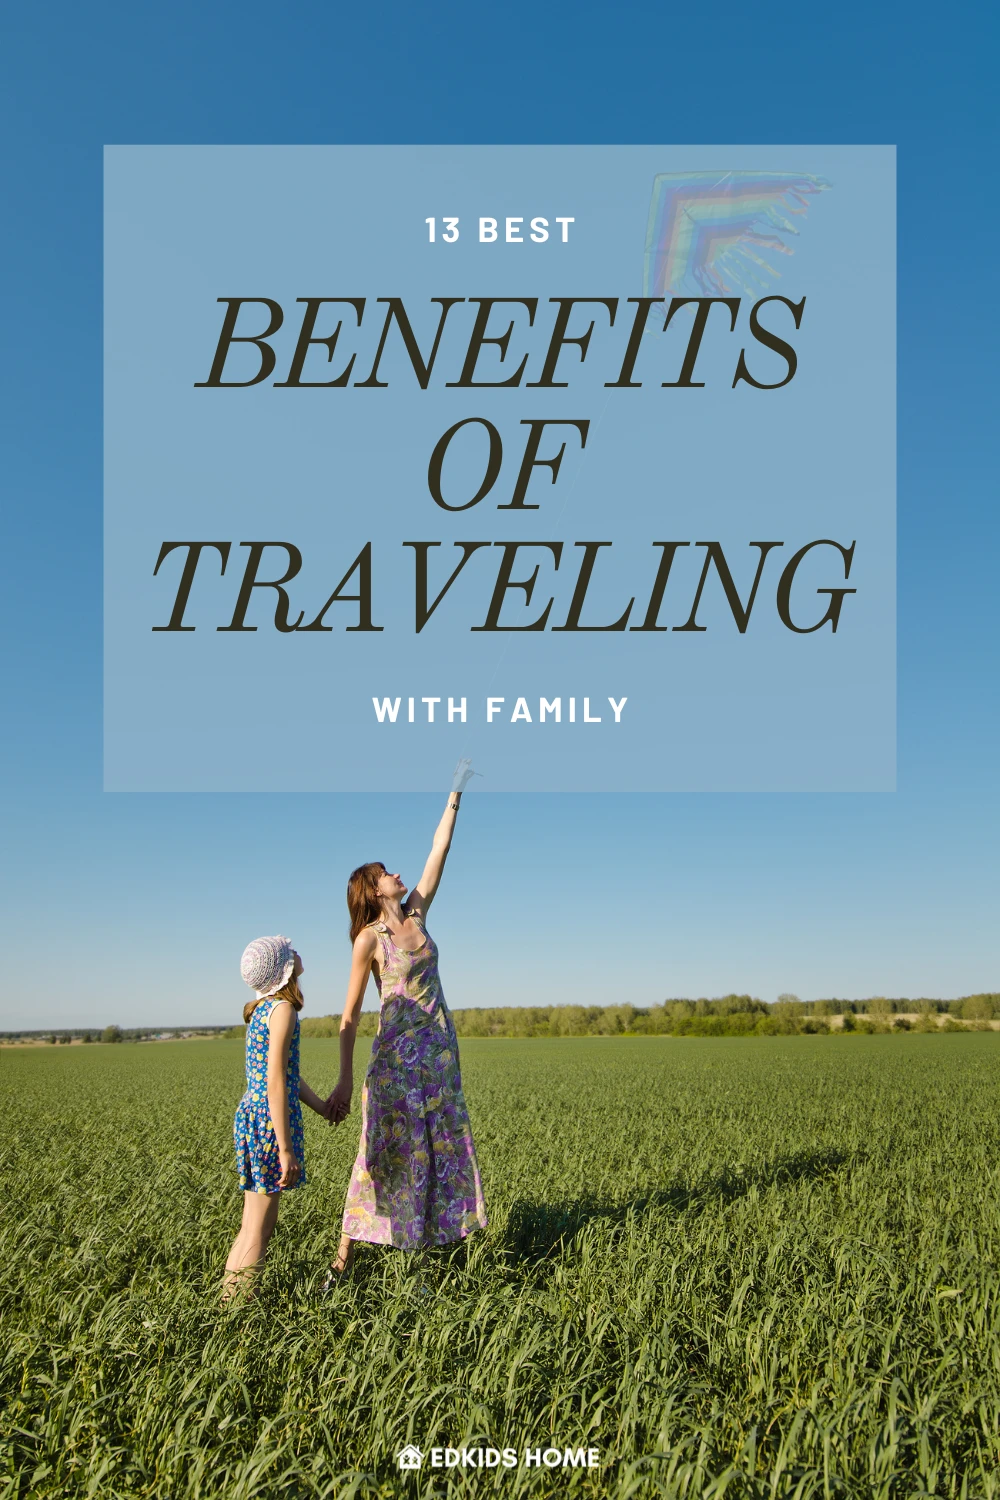 13 best benefits of traveling with family